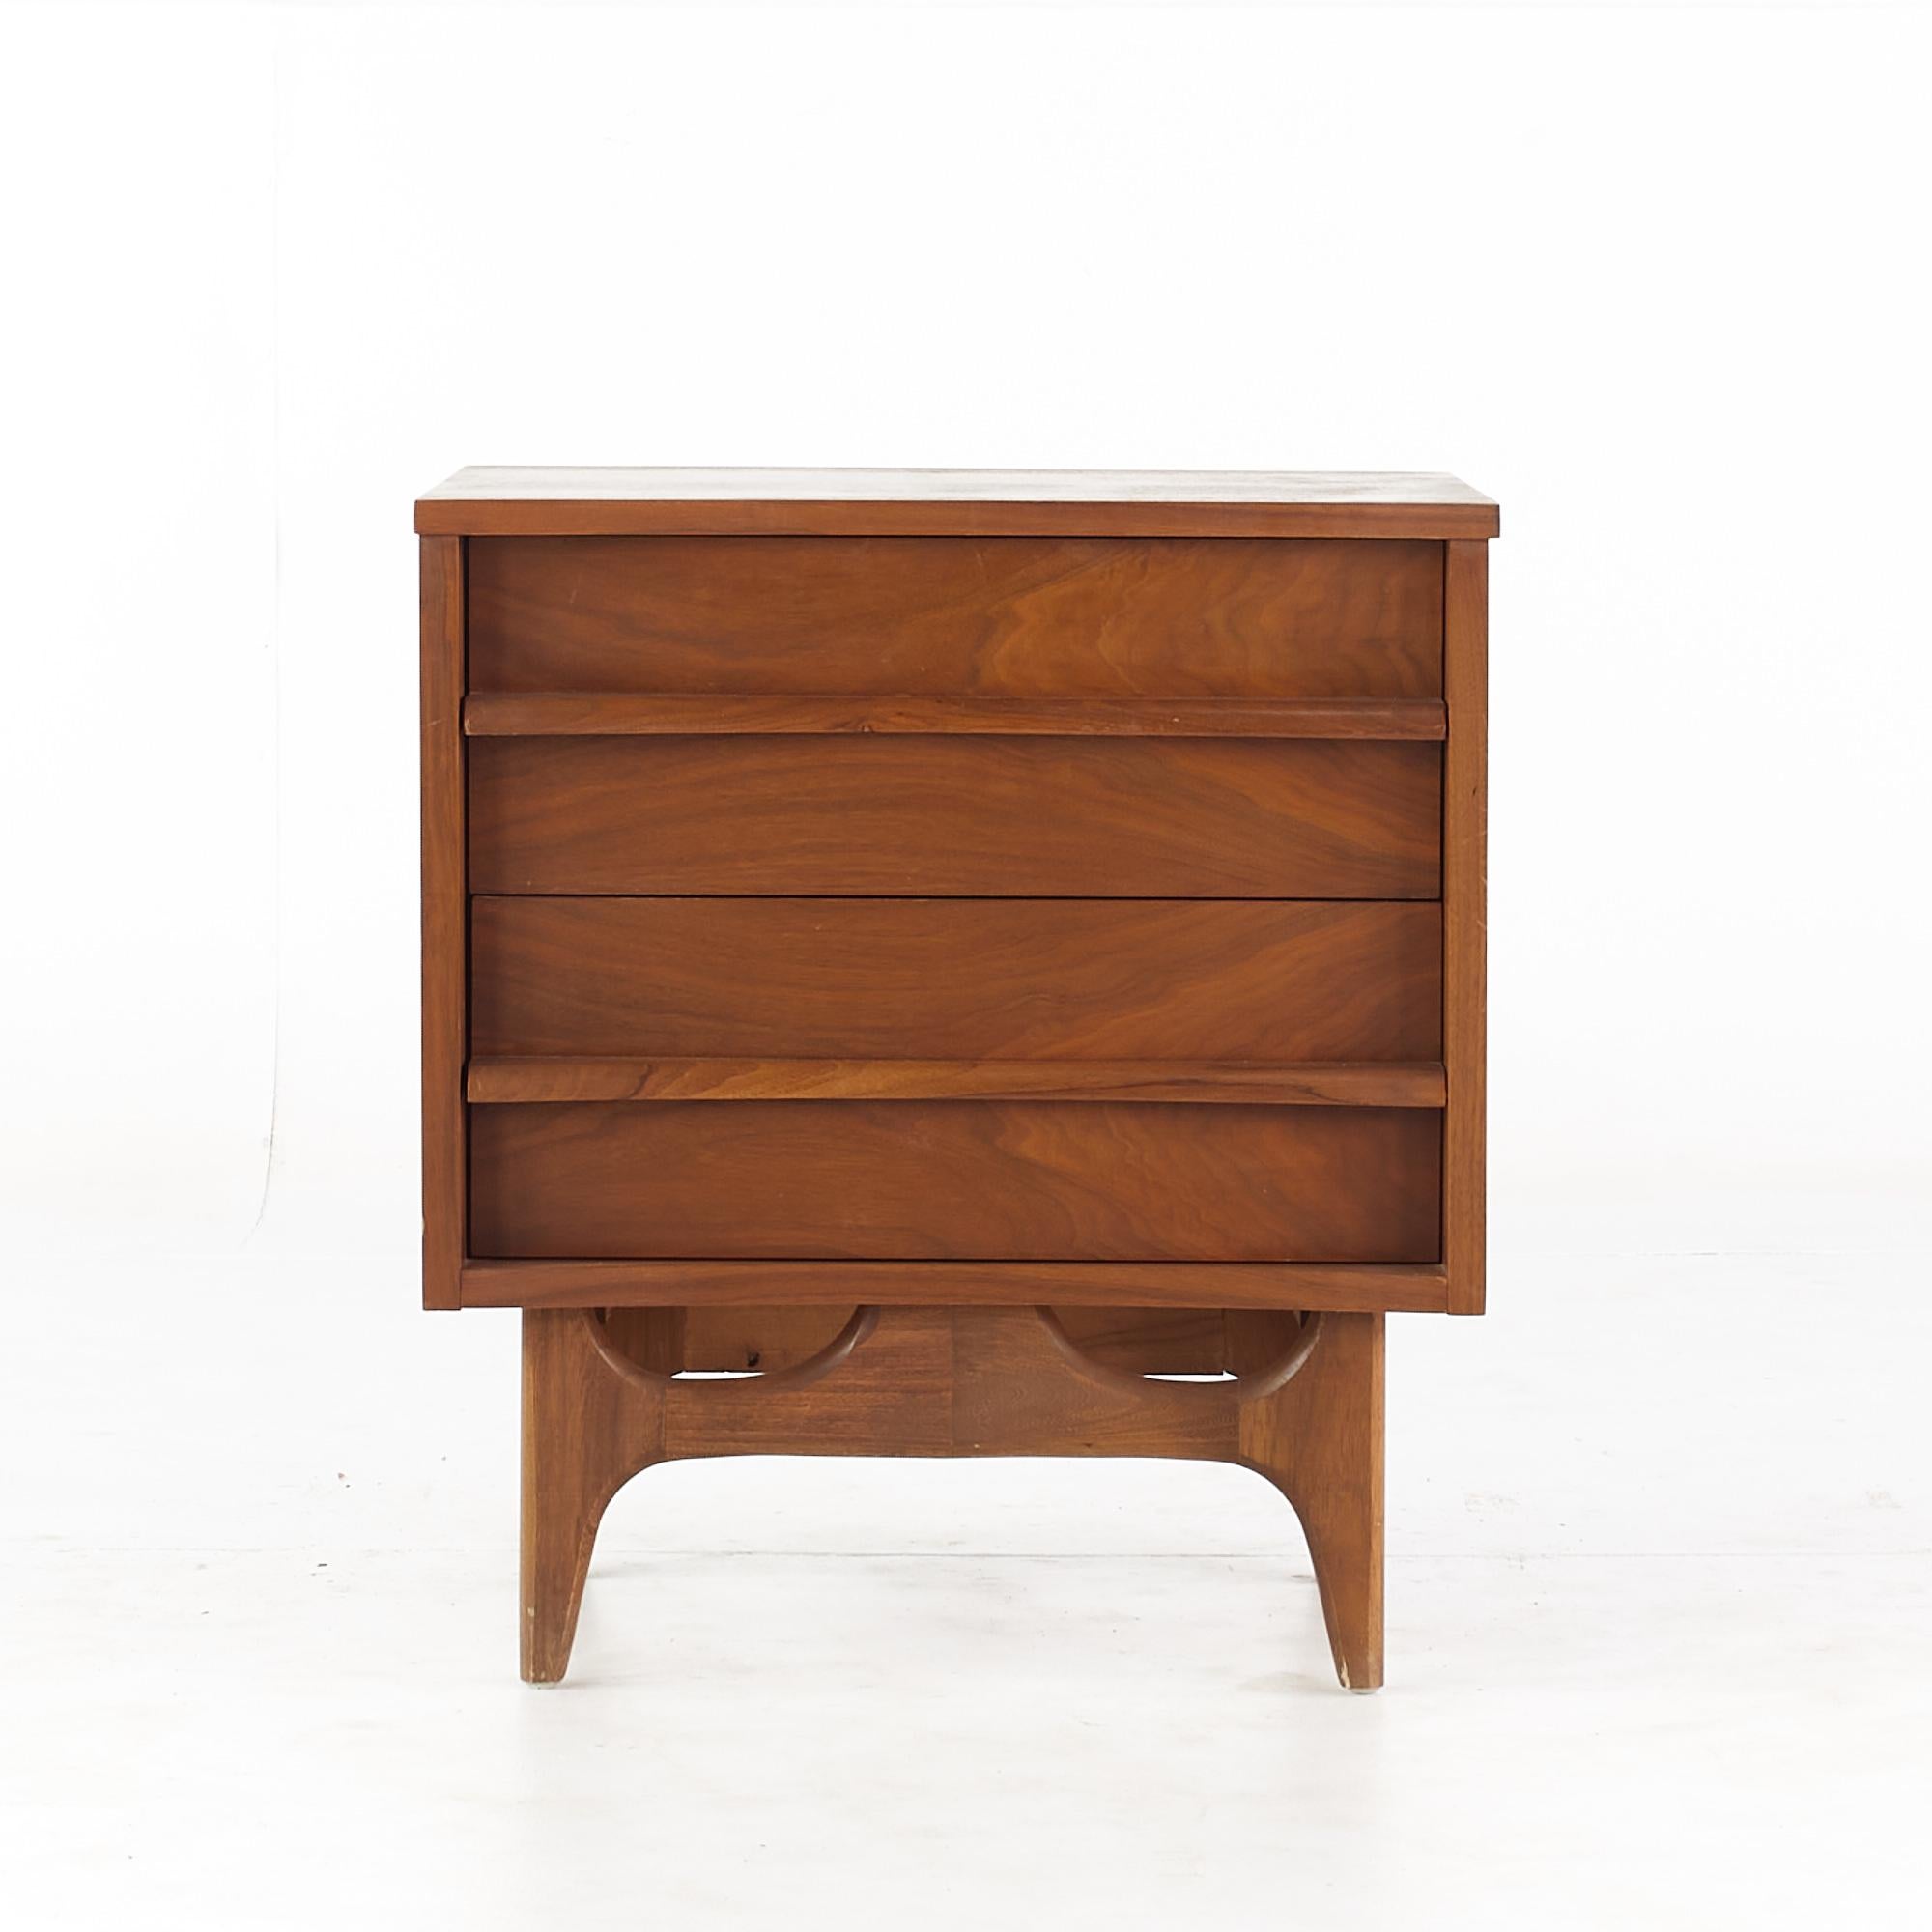 Young Manufacturing mid-century walnut curved nightstand.

This nightstand measures: 22 wide x 17 deep x 27.75 inches high.

All pieces of furniture can be had in what we call restored vintage condition. That means the piece is restored upon